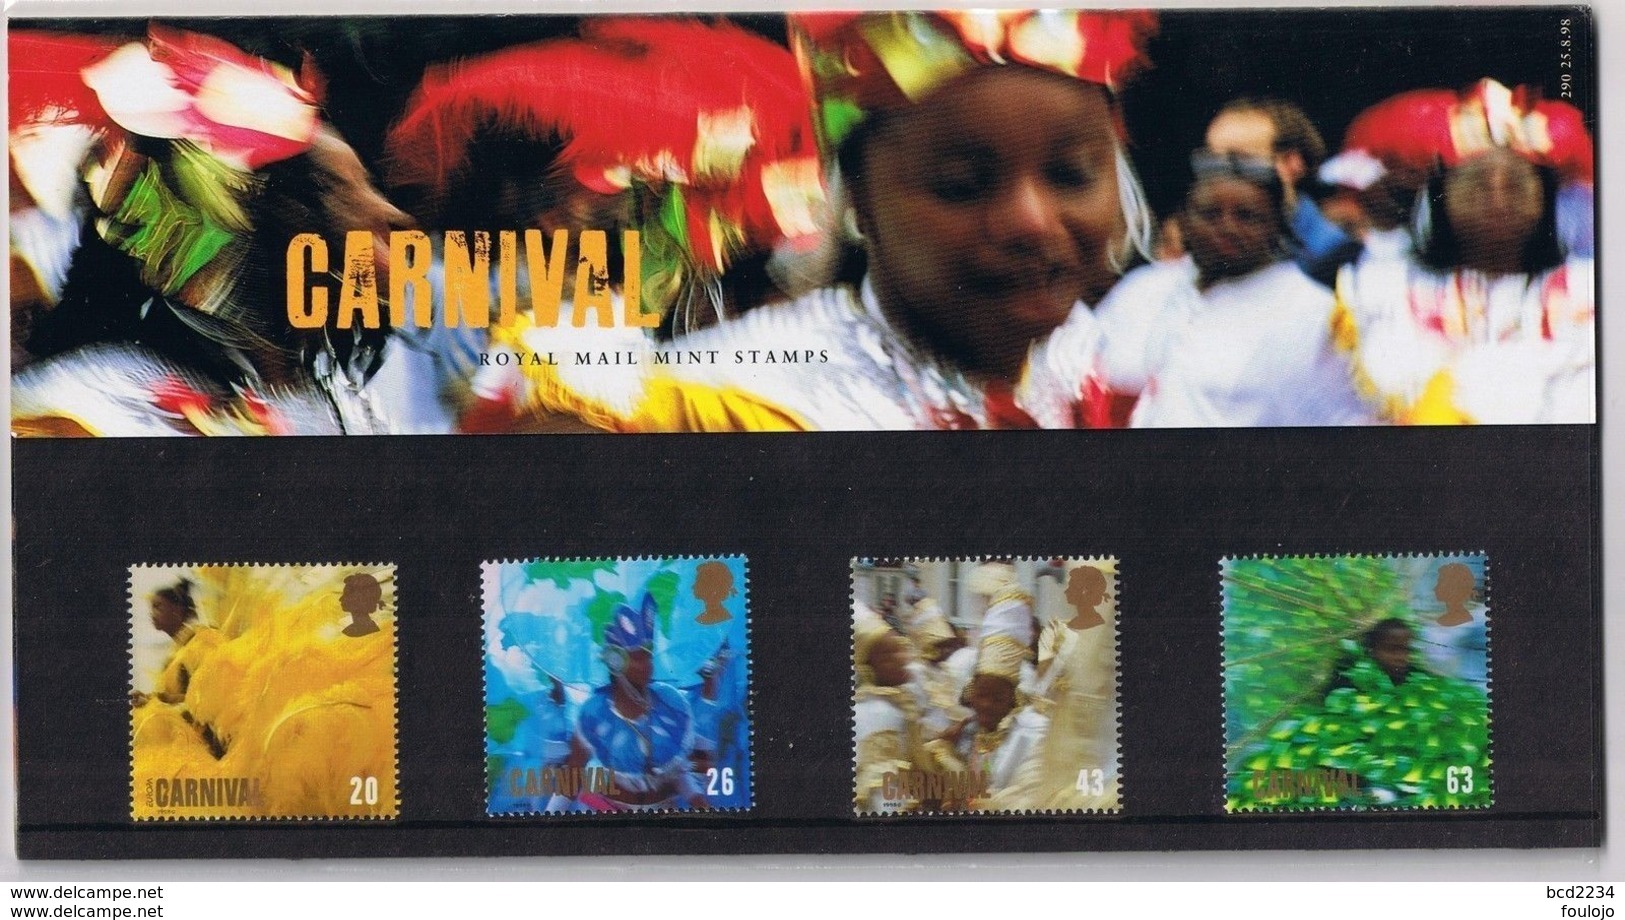 2055/58 EUROPA FESTIVAL NOTTING HILL CARNIVAL LONDON PRESENTATION  ALL SPECIAL INSERTS INCLUDED (lot 627) - Unused Stamps